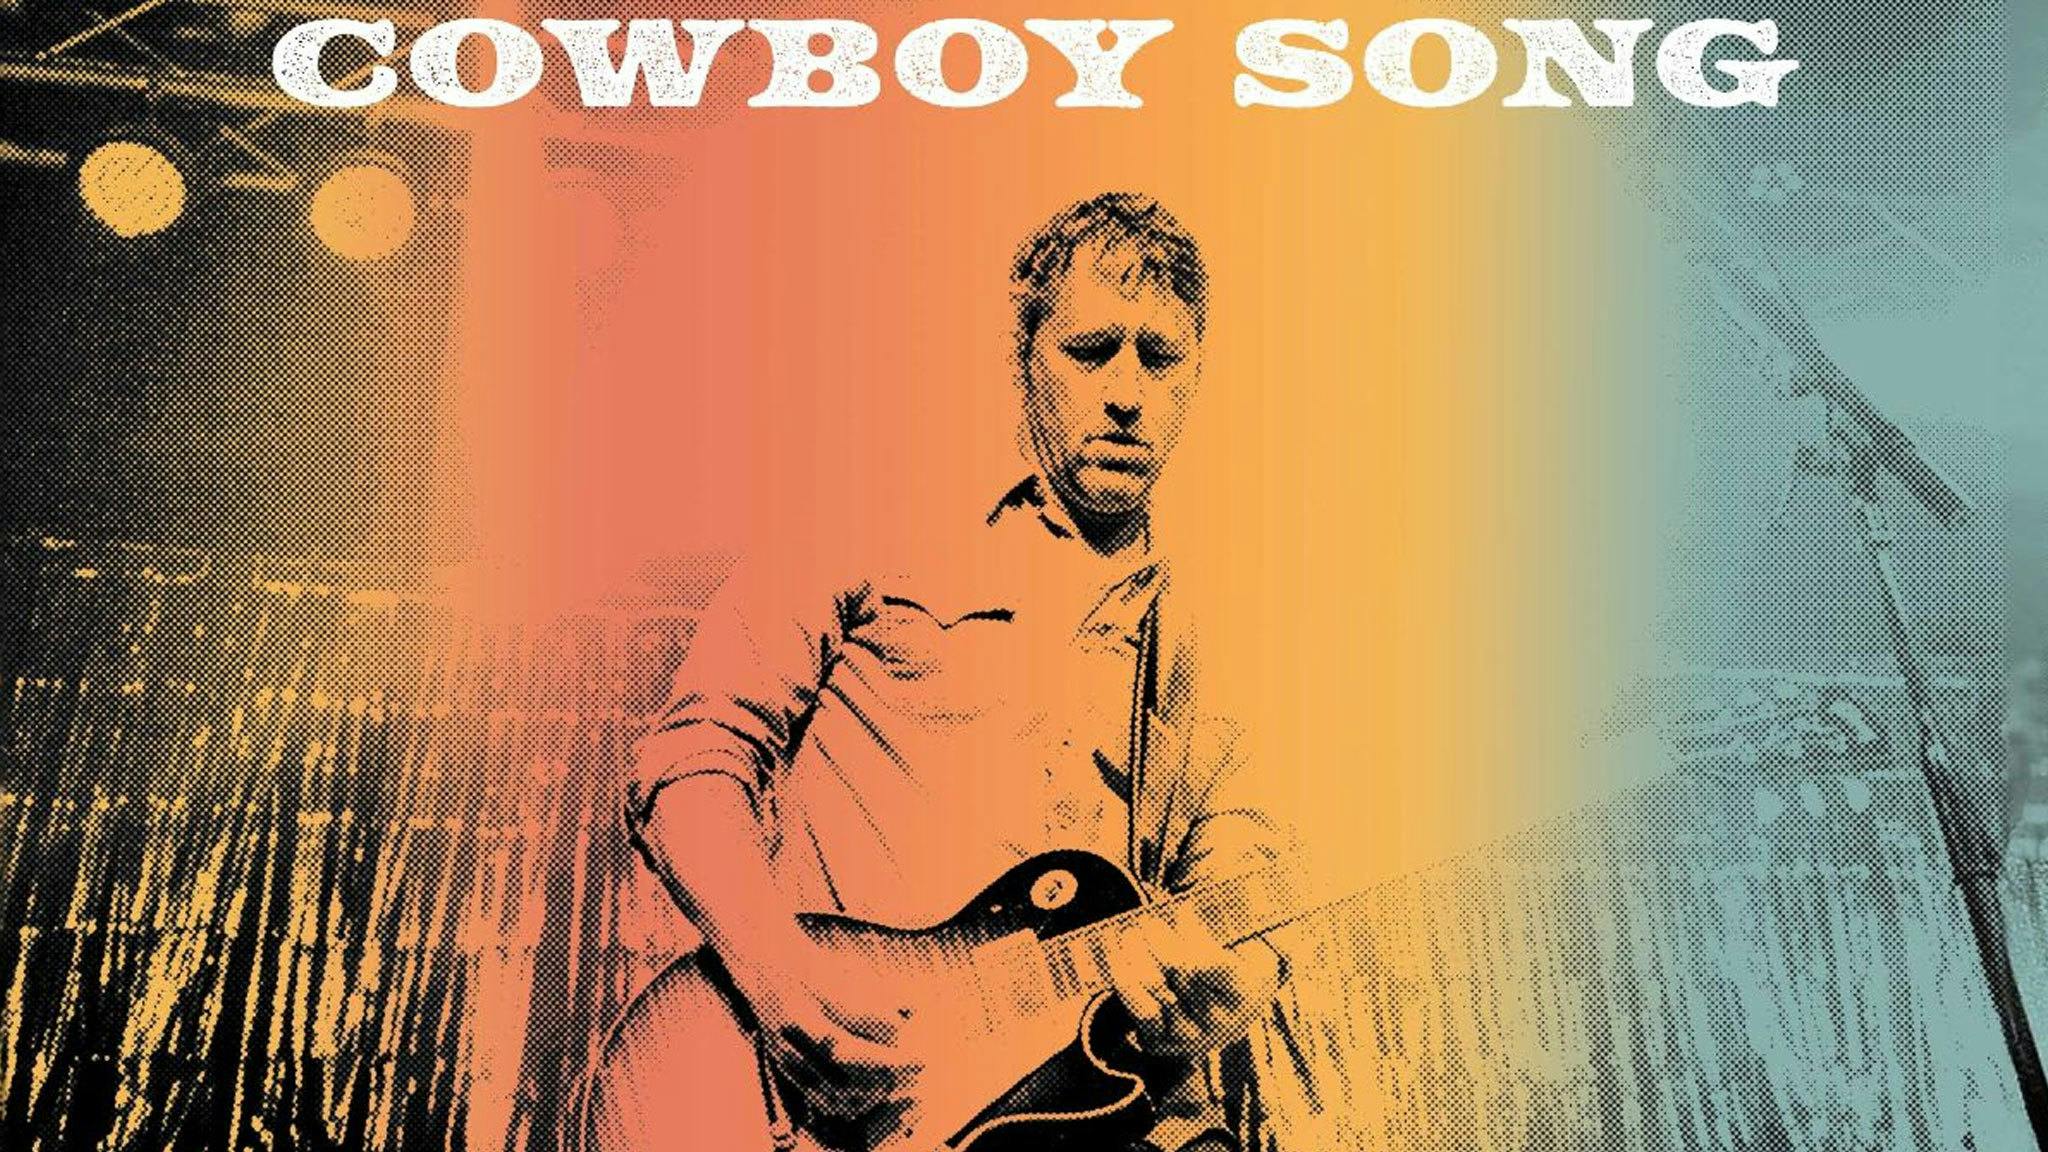 Hear Chris Shiflett’s country cover of Thin Lizzy’s Cowboy Song